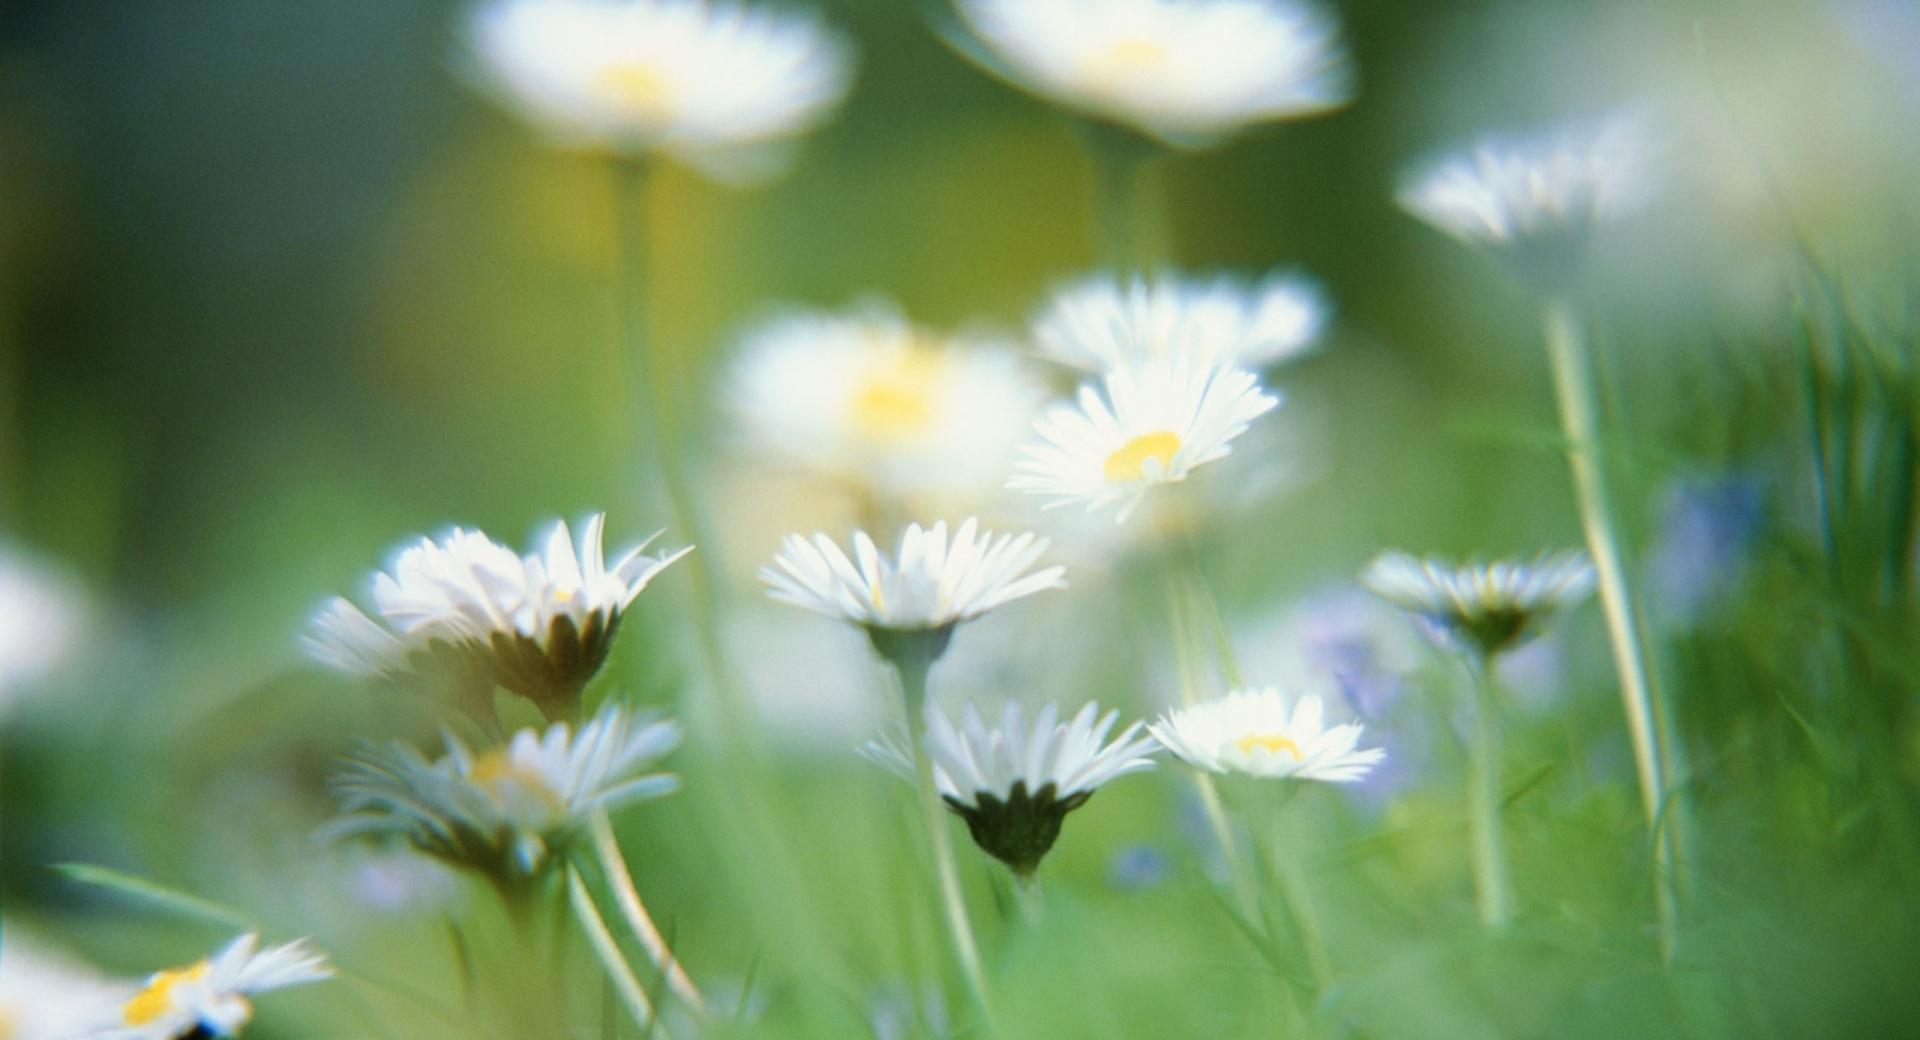 Blurry Daisies wallpapers HD quality